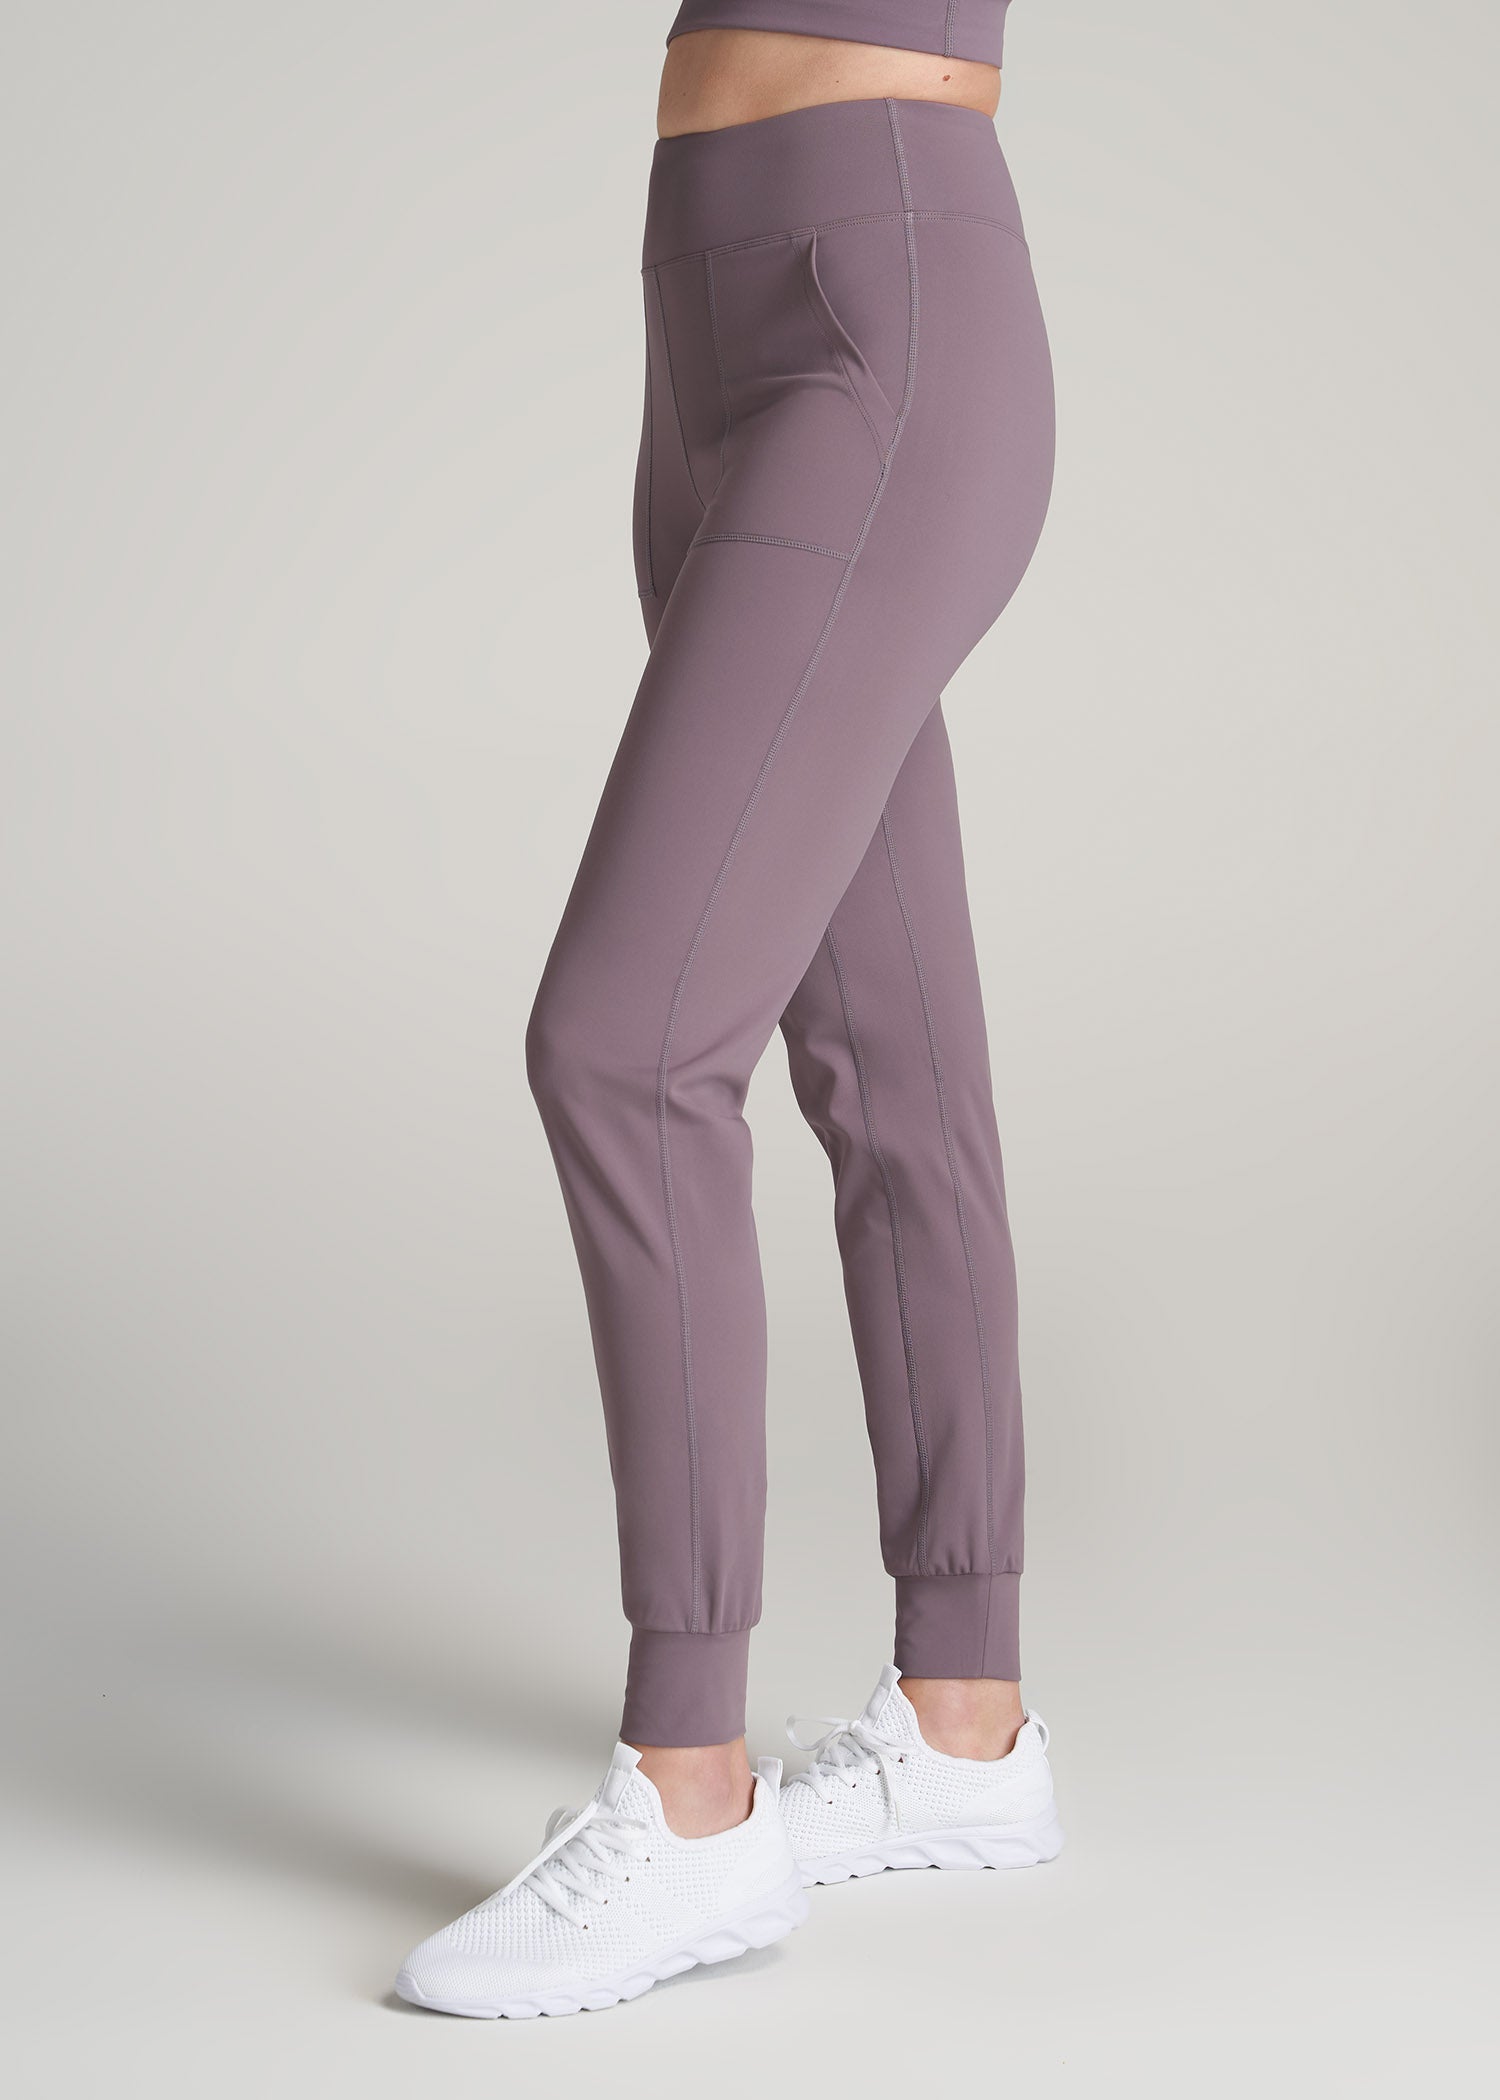 A tall woman wearing American Tall's AT Balance Pocket Joggers in the color Smoked Mauve.